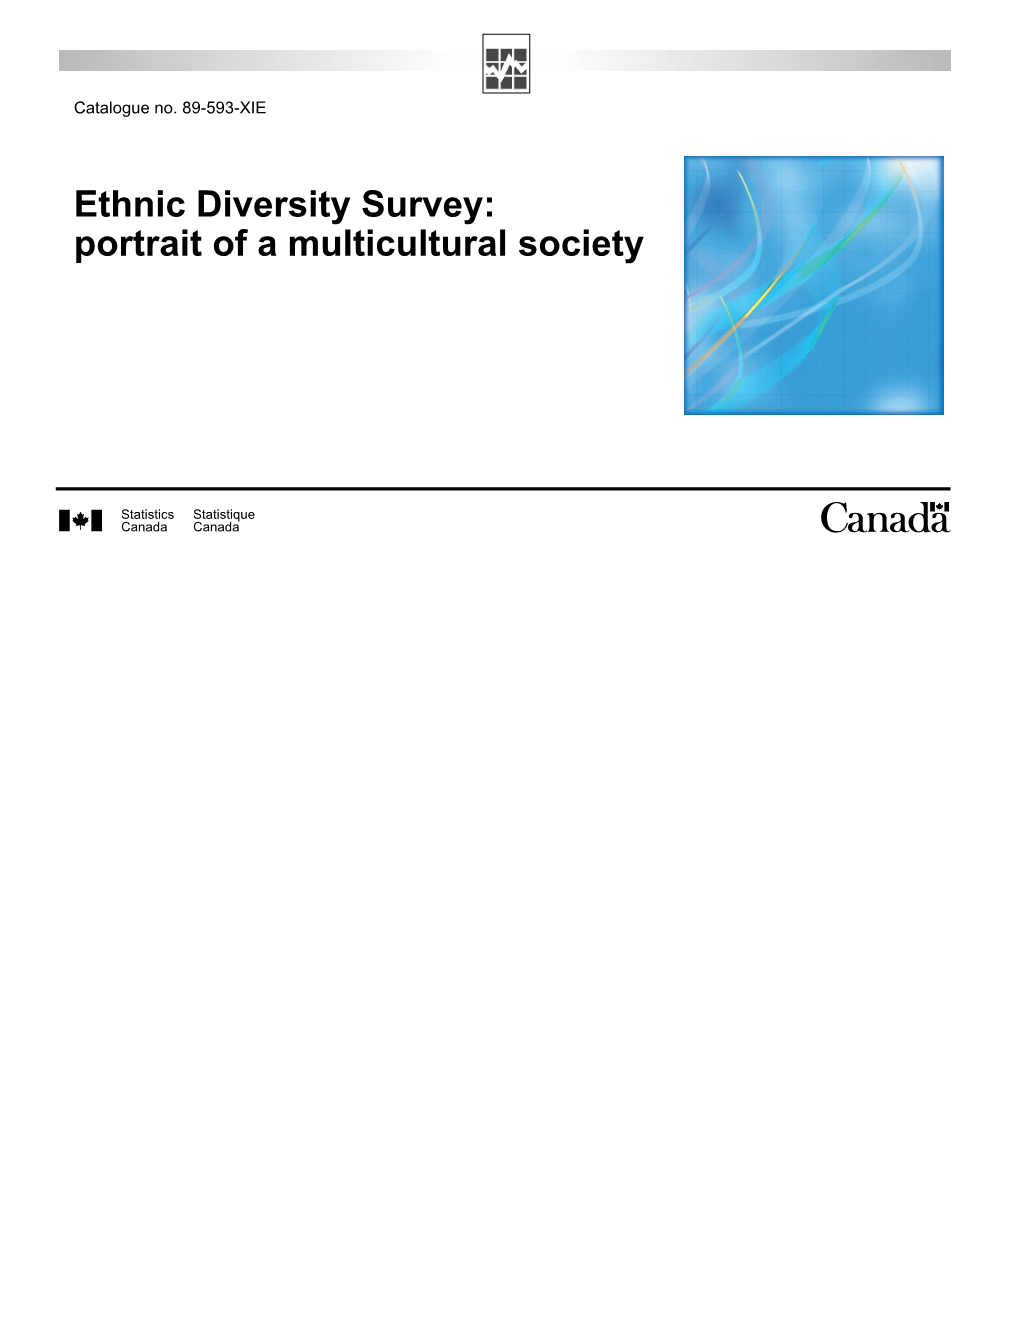 Ethnic Diversity Survey: Portrait of a Multicultural Society